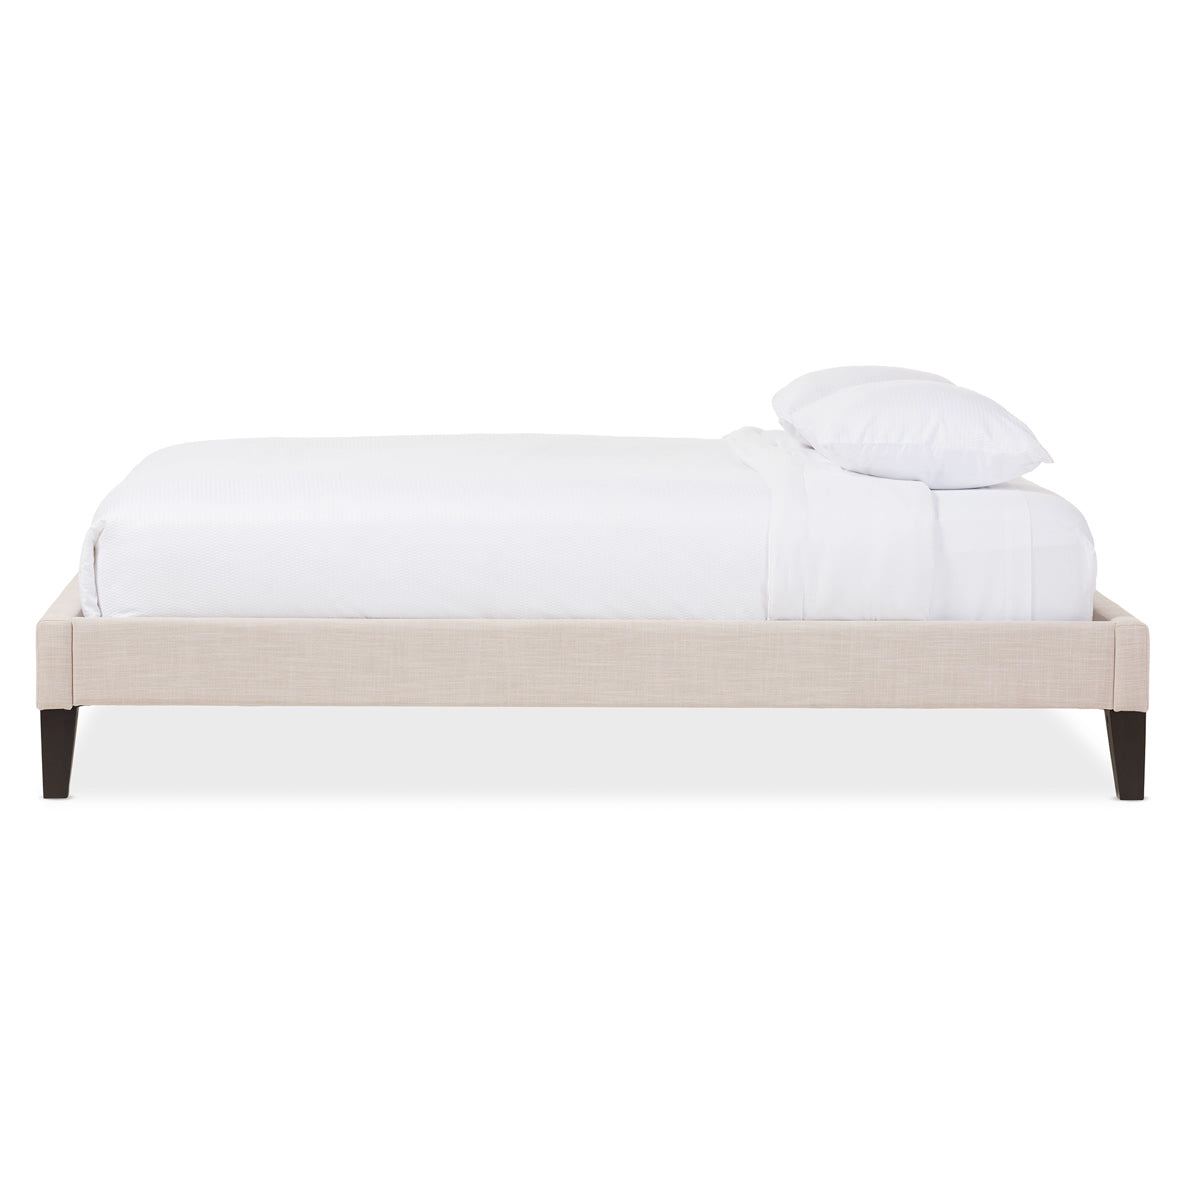 Baxton Studio Lancashire Modern and Contemporary Beige Linen Fabric Upholstered King Size Bed Frame with Tapered Legs  Baxton Studio-King Bed-Minimal And Modern - 3